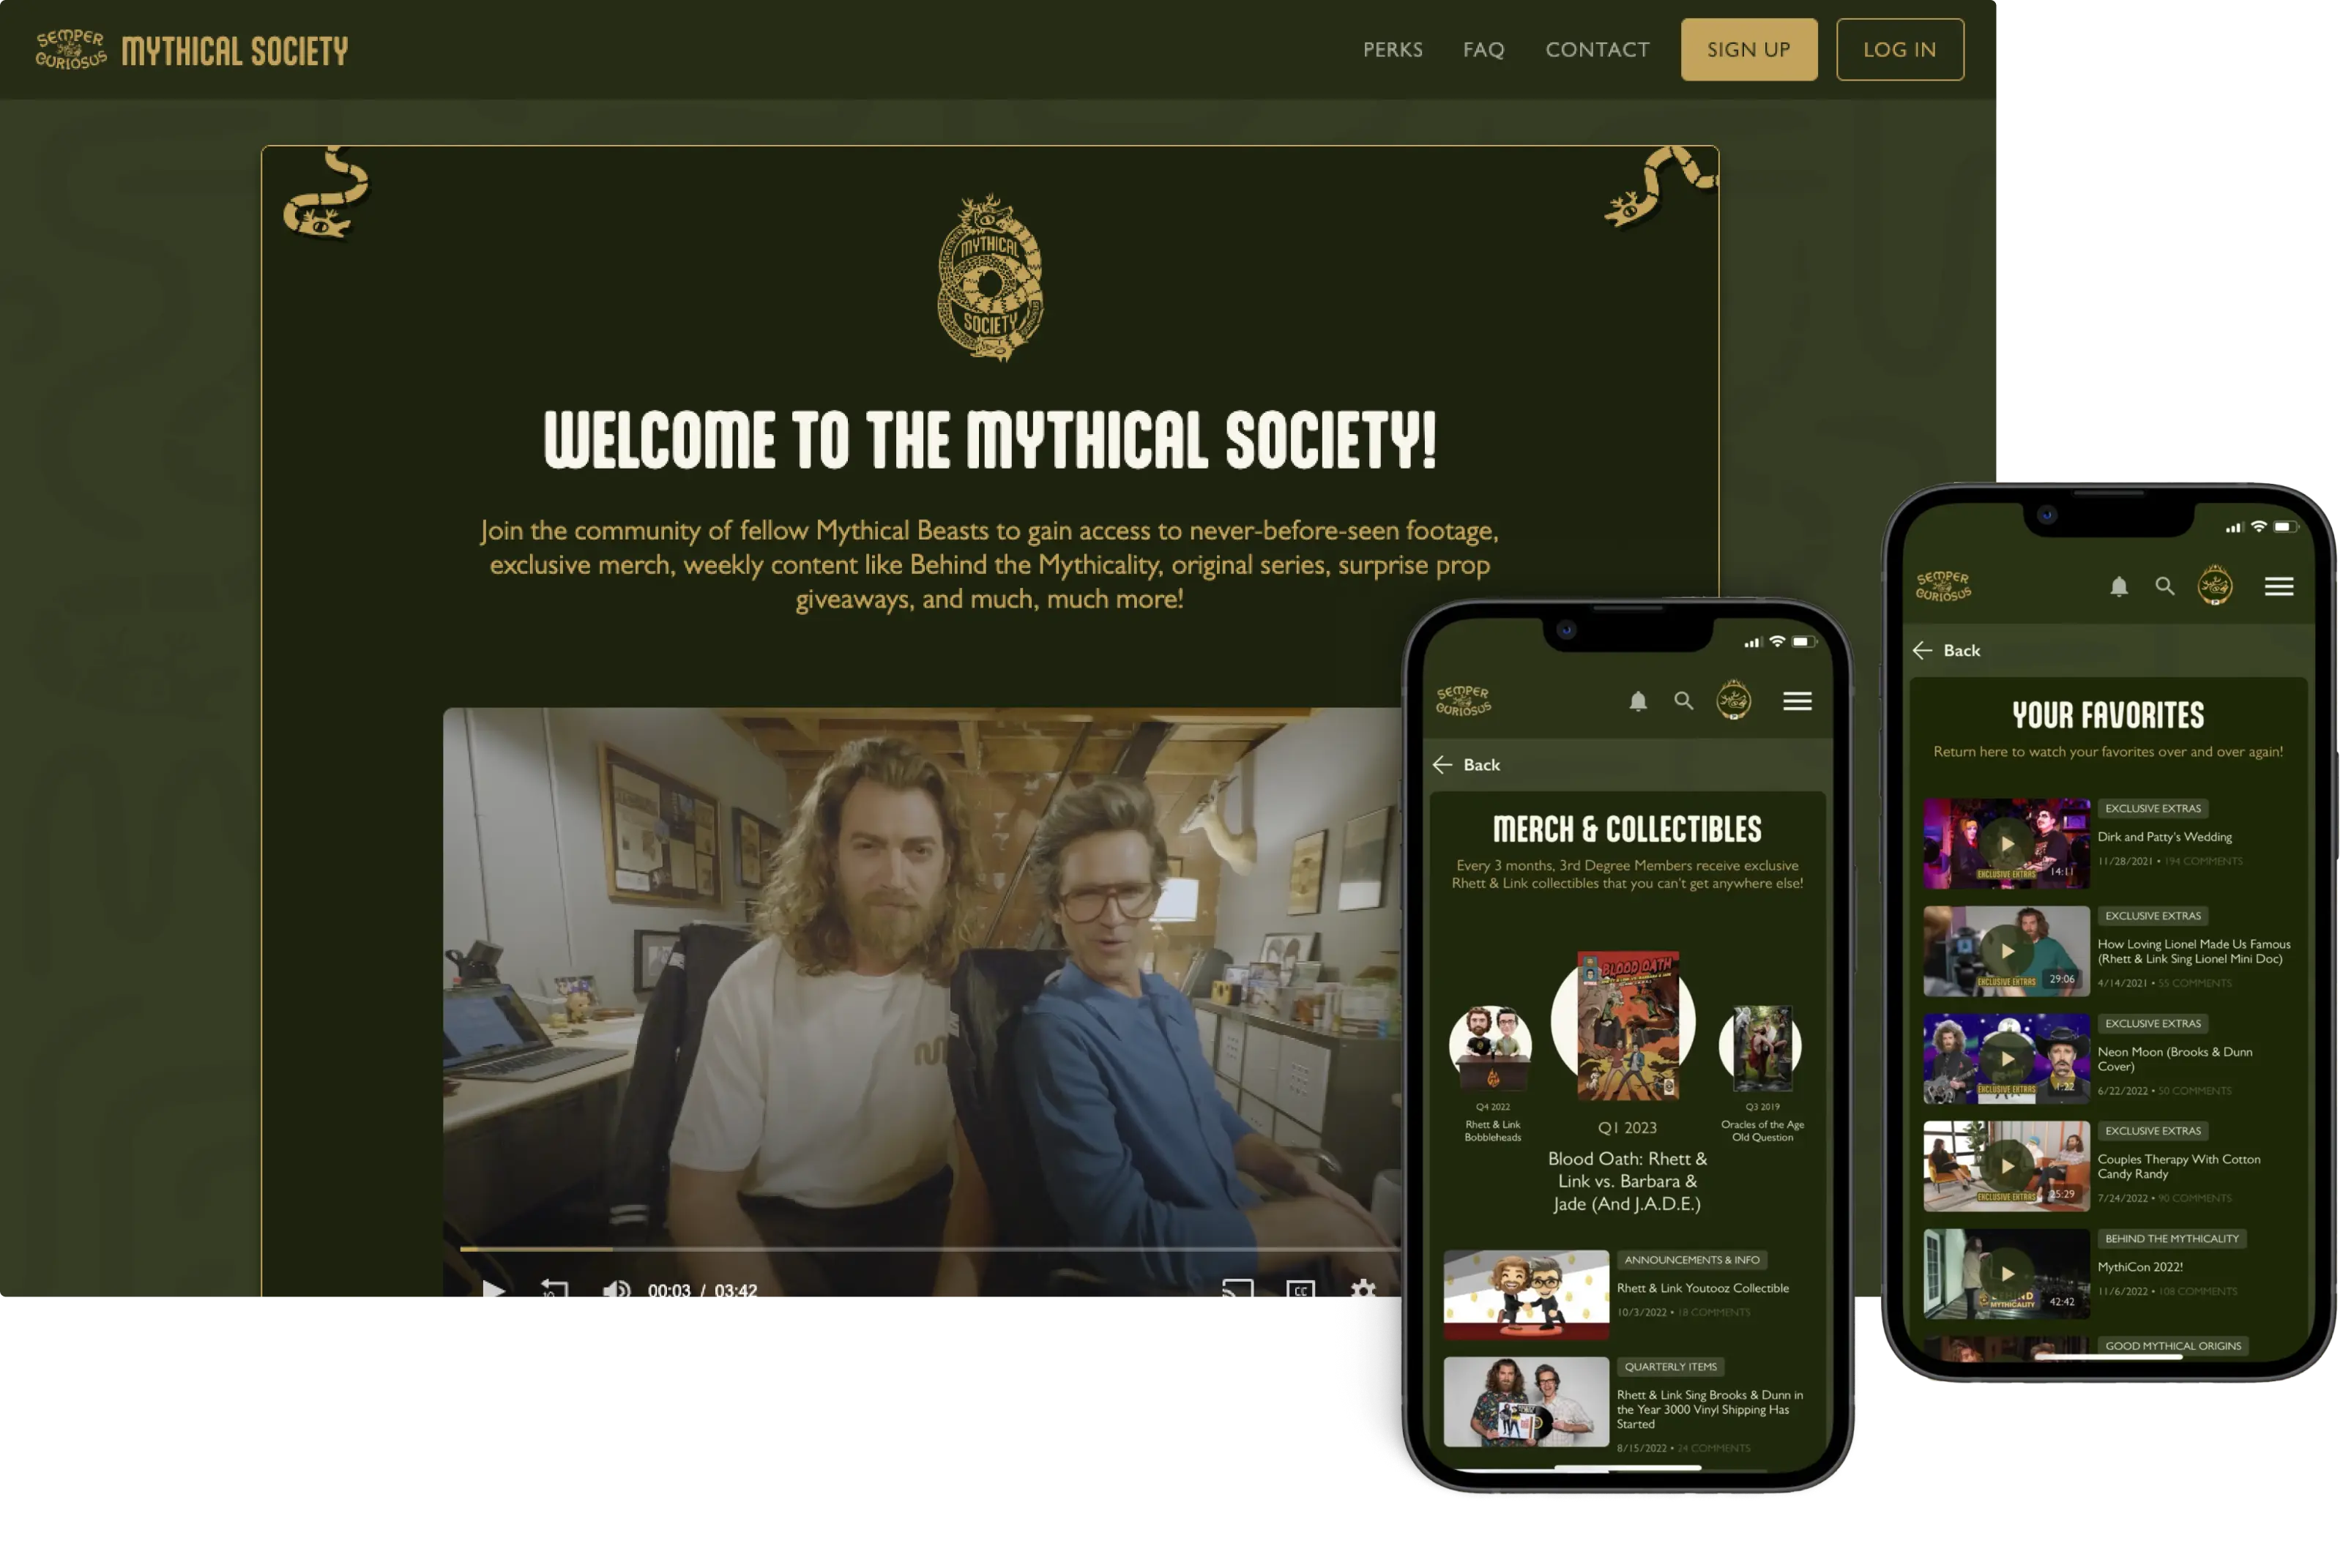 Mythical Society website and app